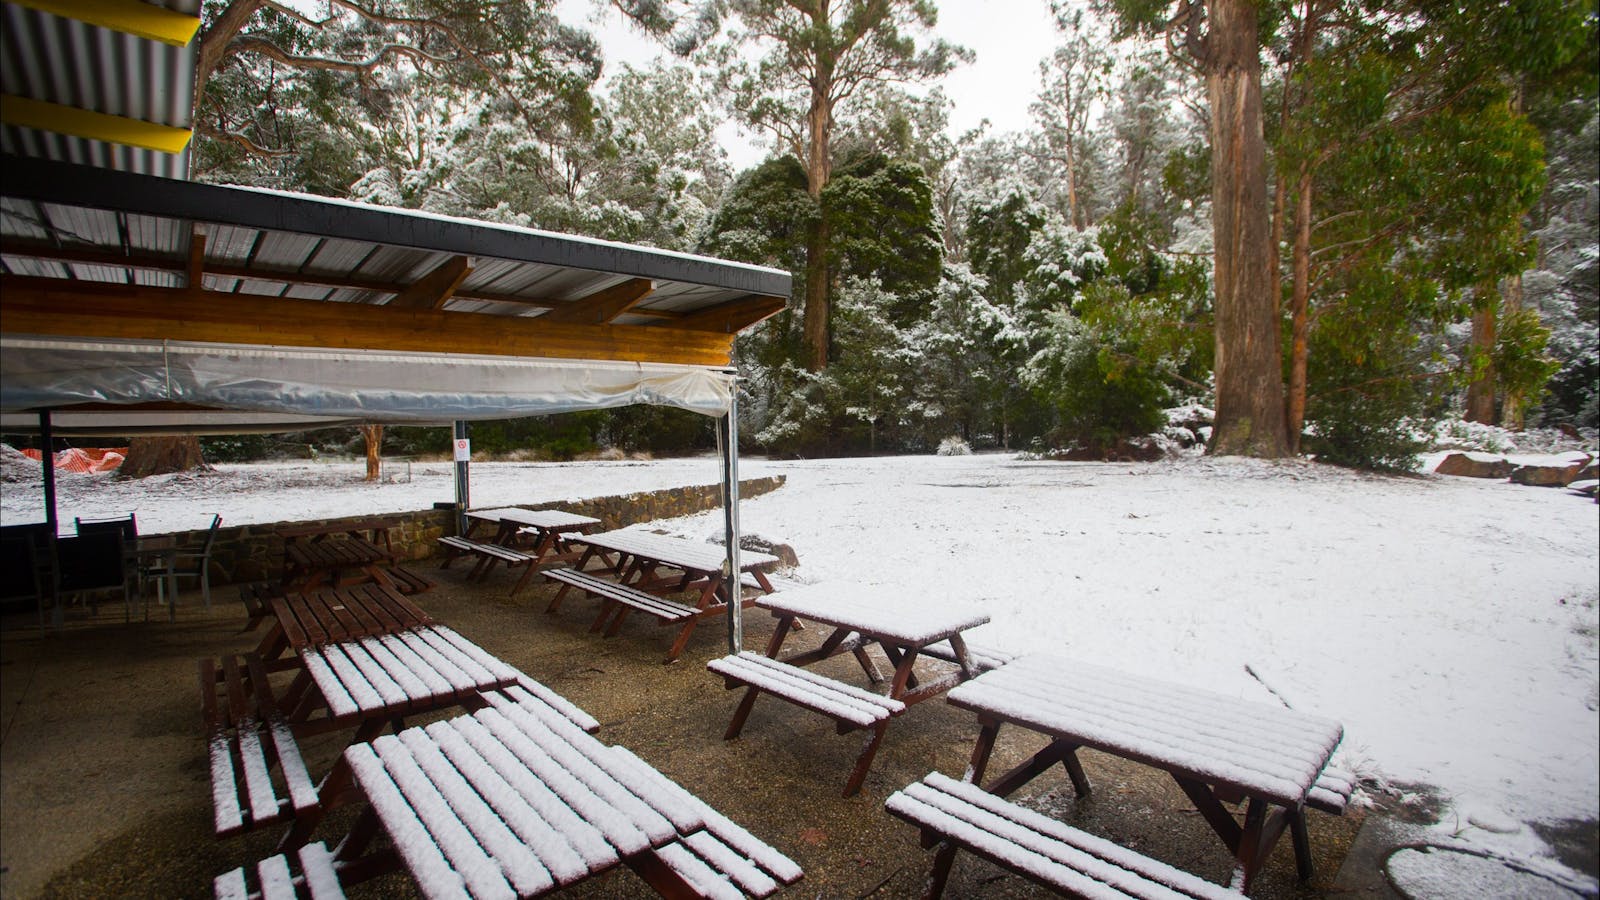 Outdoor seating area in snow